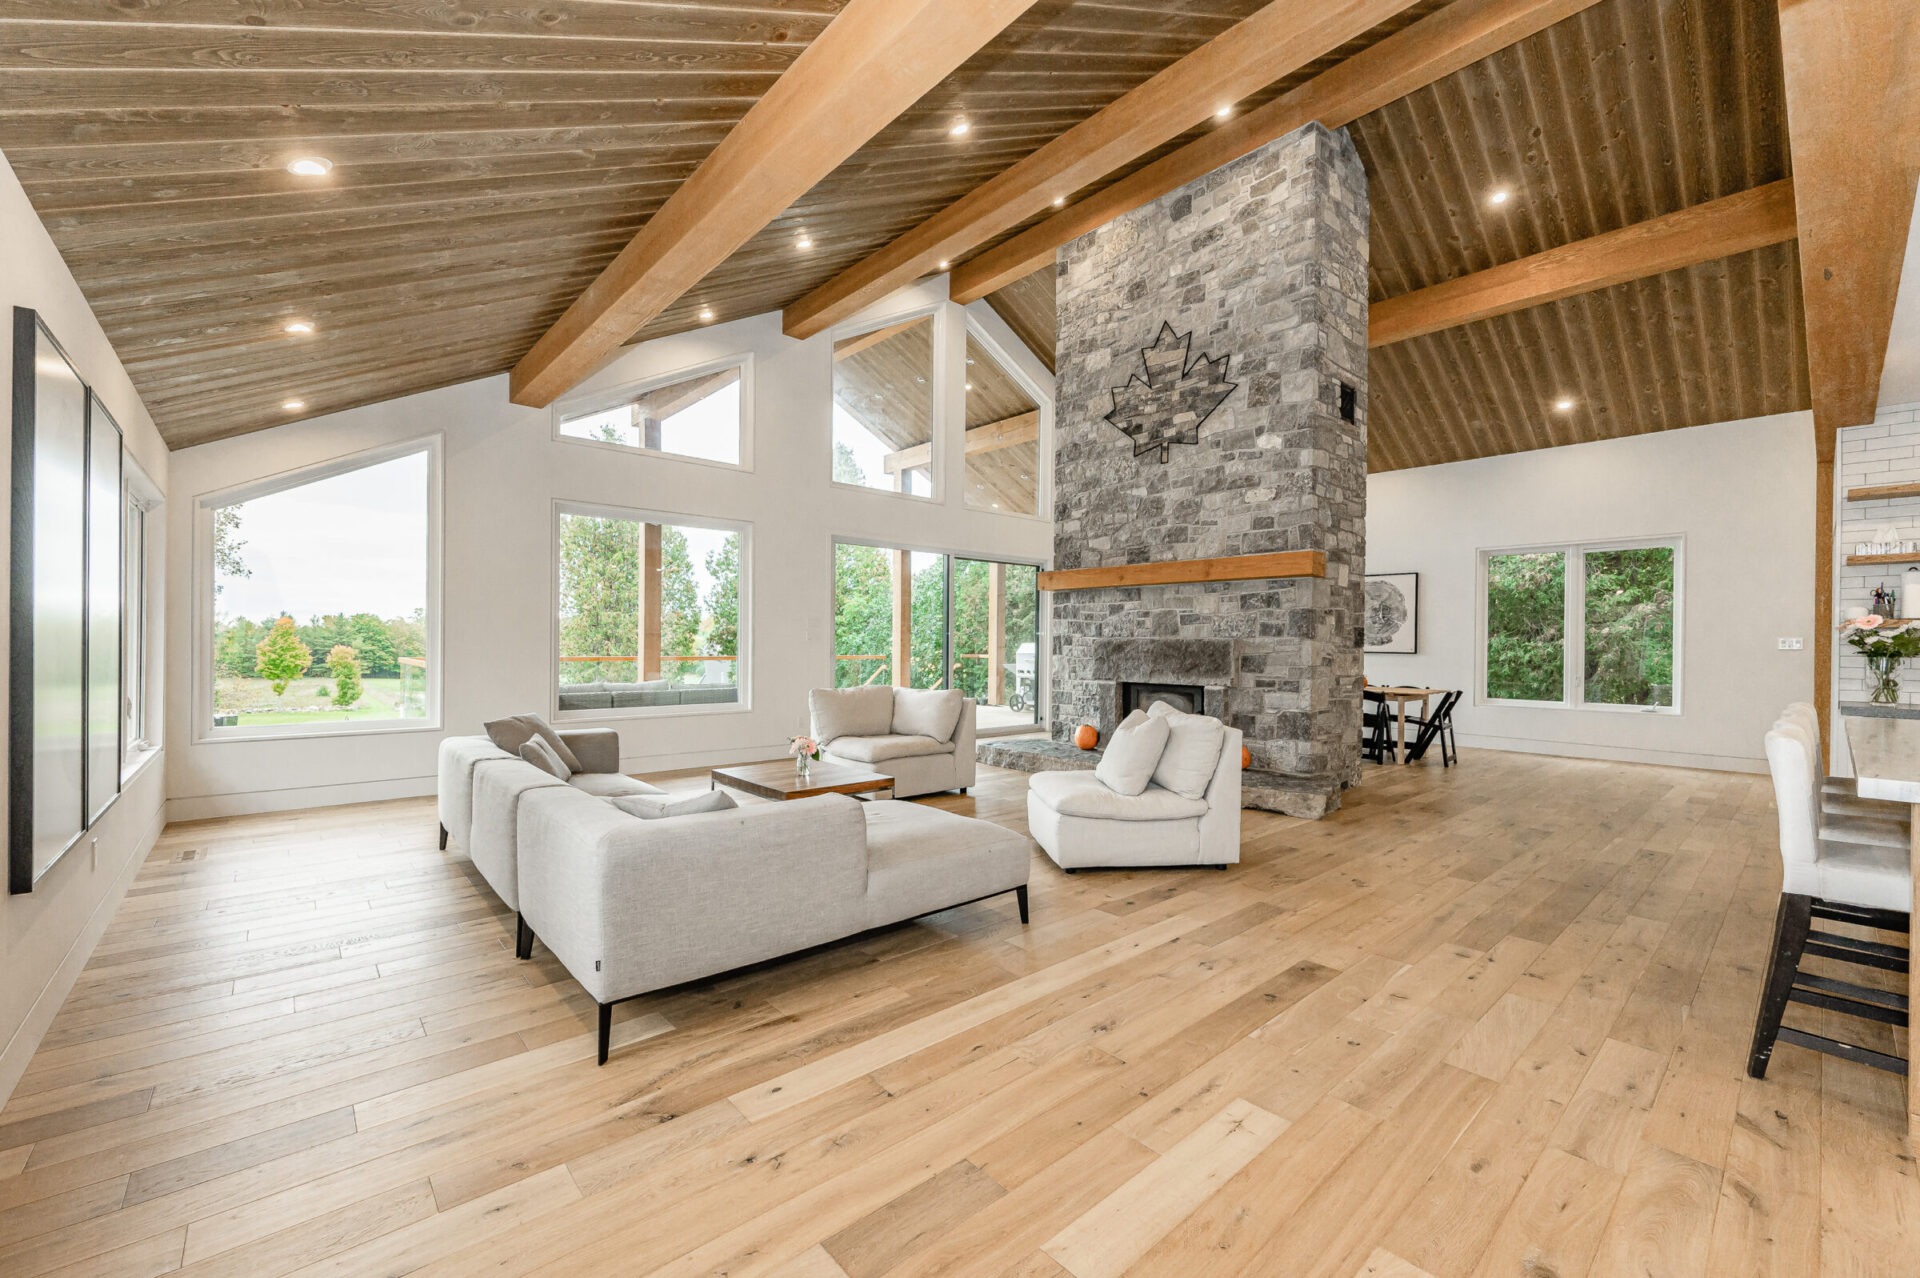 A spacious, modern living room with high ceilings, wooden beams, large windows, a stone fireplace, and contemporary furniture. Bright, natural light fills the space.